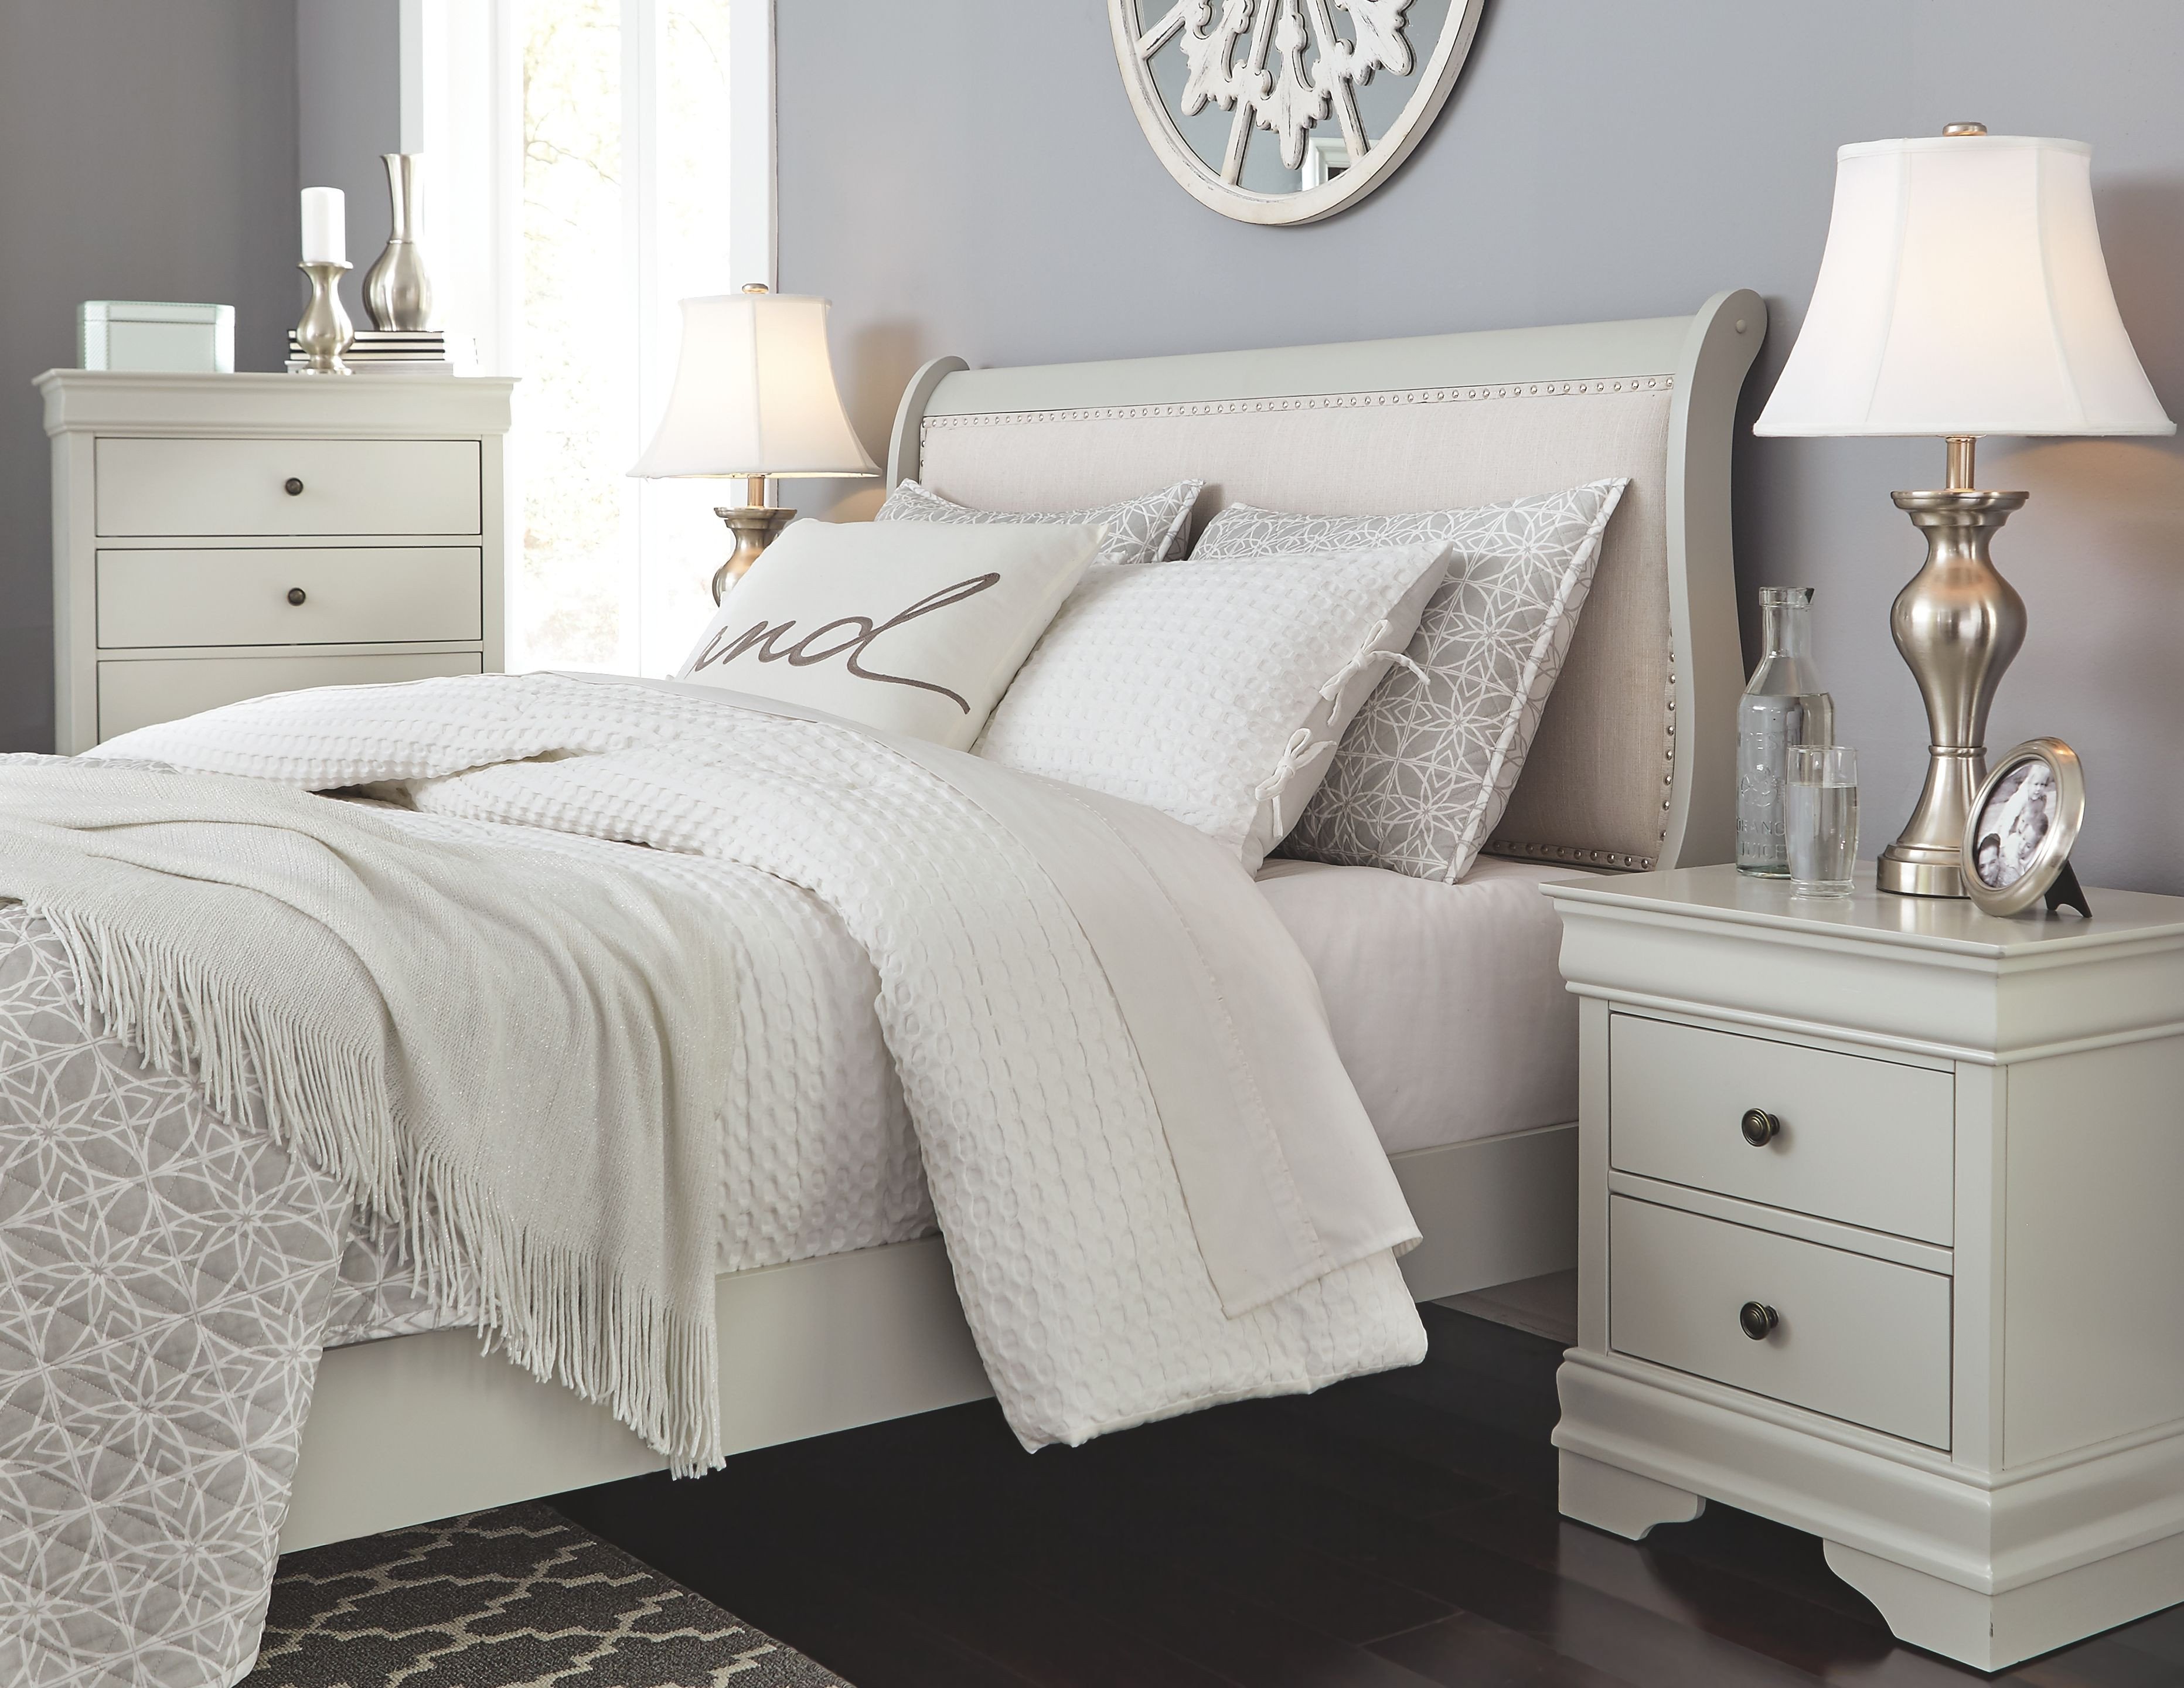 Signature Design by ashley Bedroom Set Unique Jorstad Full Bed with 2 Nightstands Gray